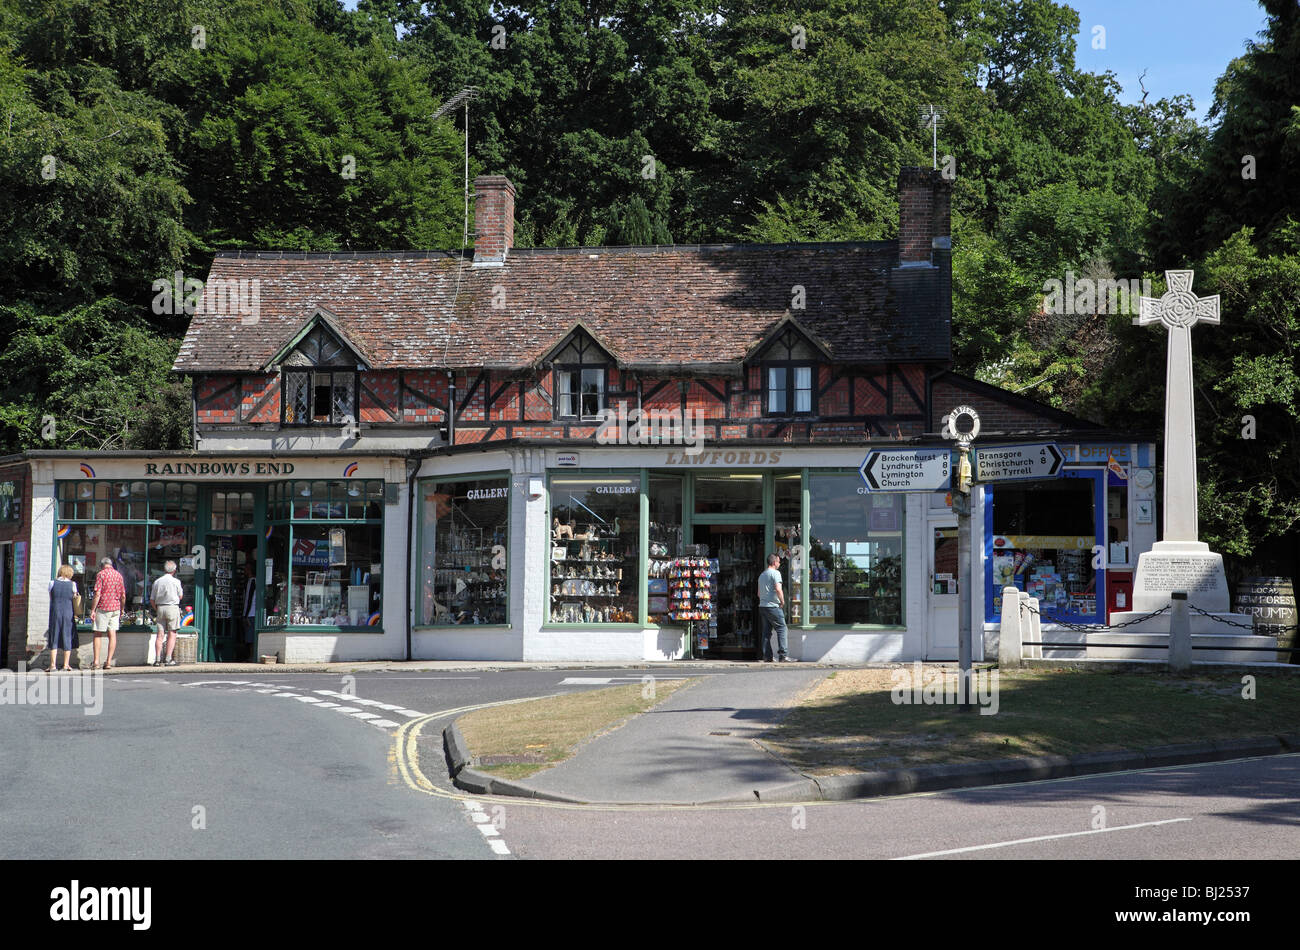 New Forest, Burley Banque D'Images